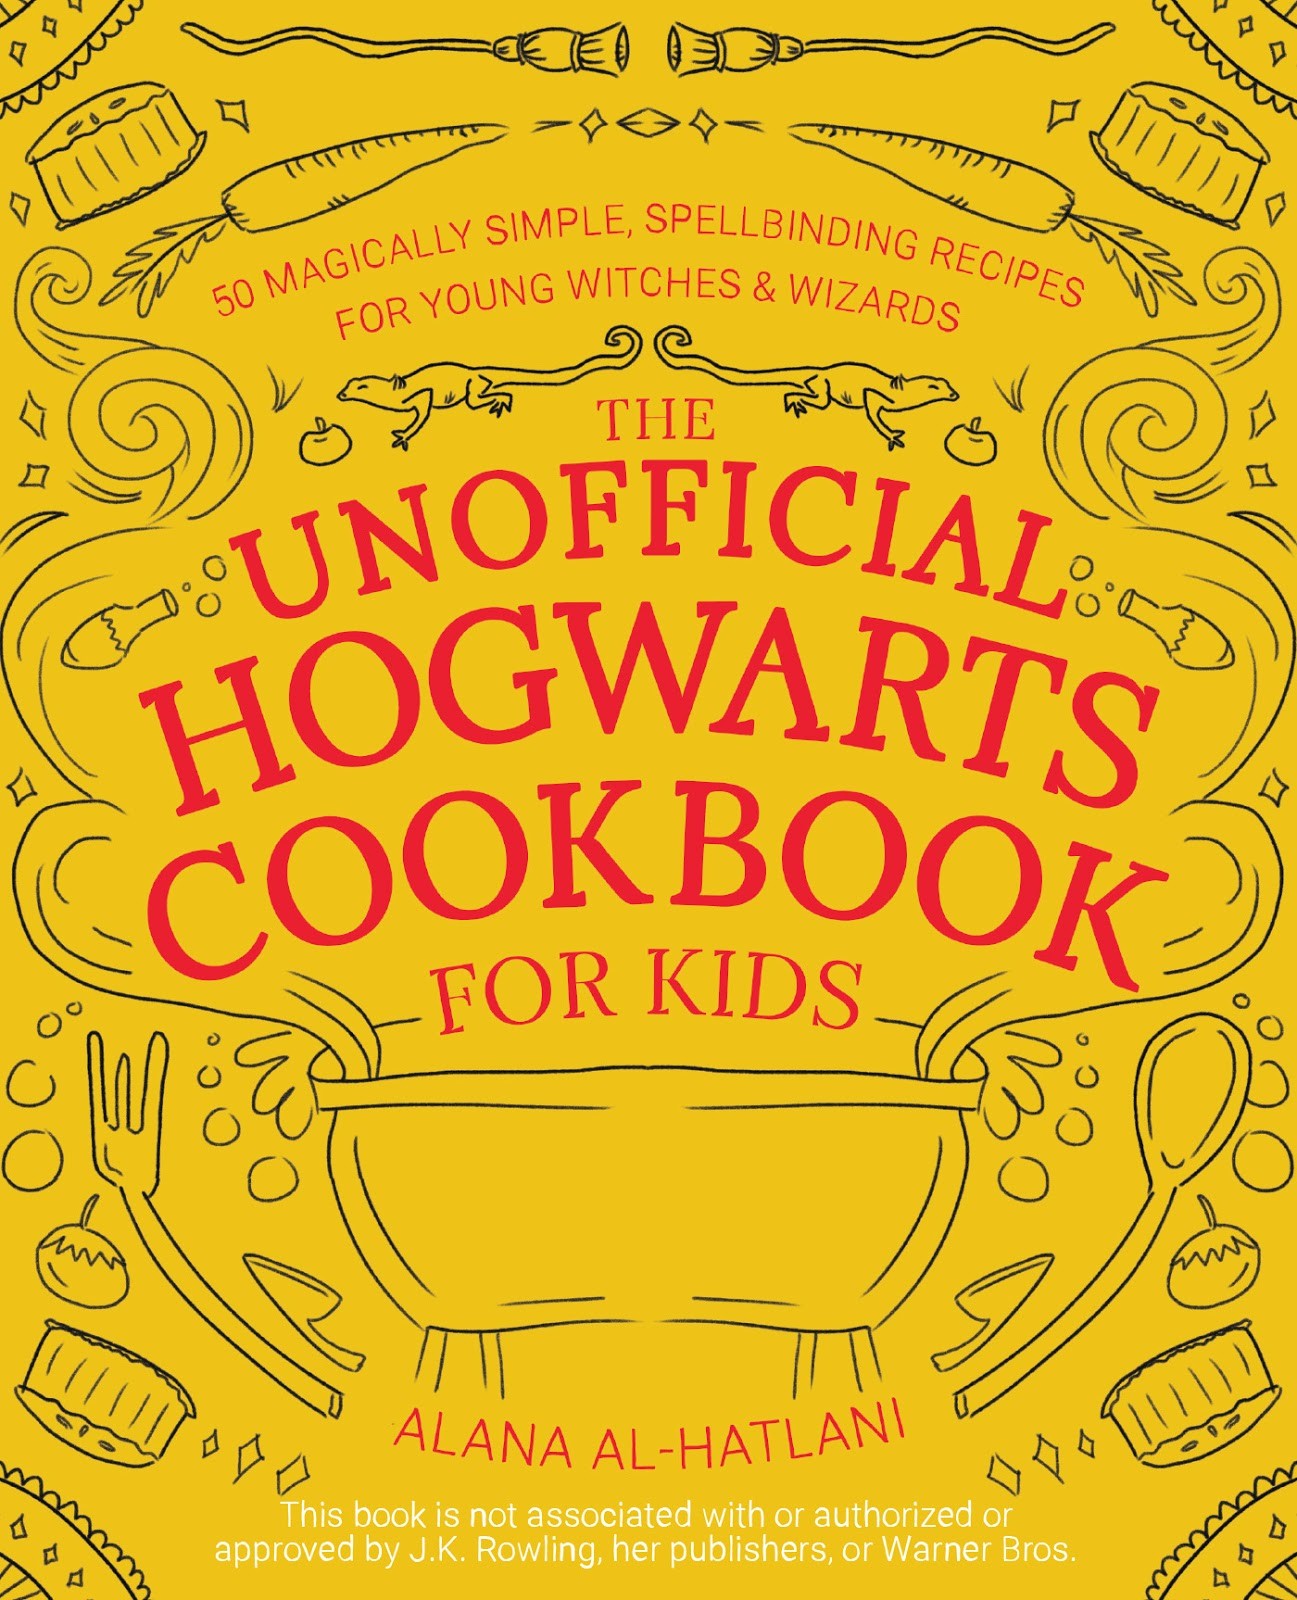 The Unofficial Hogwarts Cookbook for Kids: 50 Magically Simple, Spellbinding Recipes for Young Witches and Wizards 